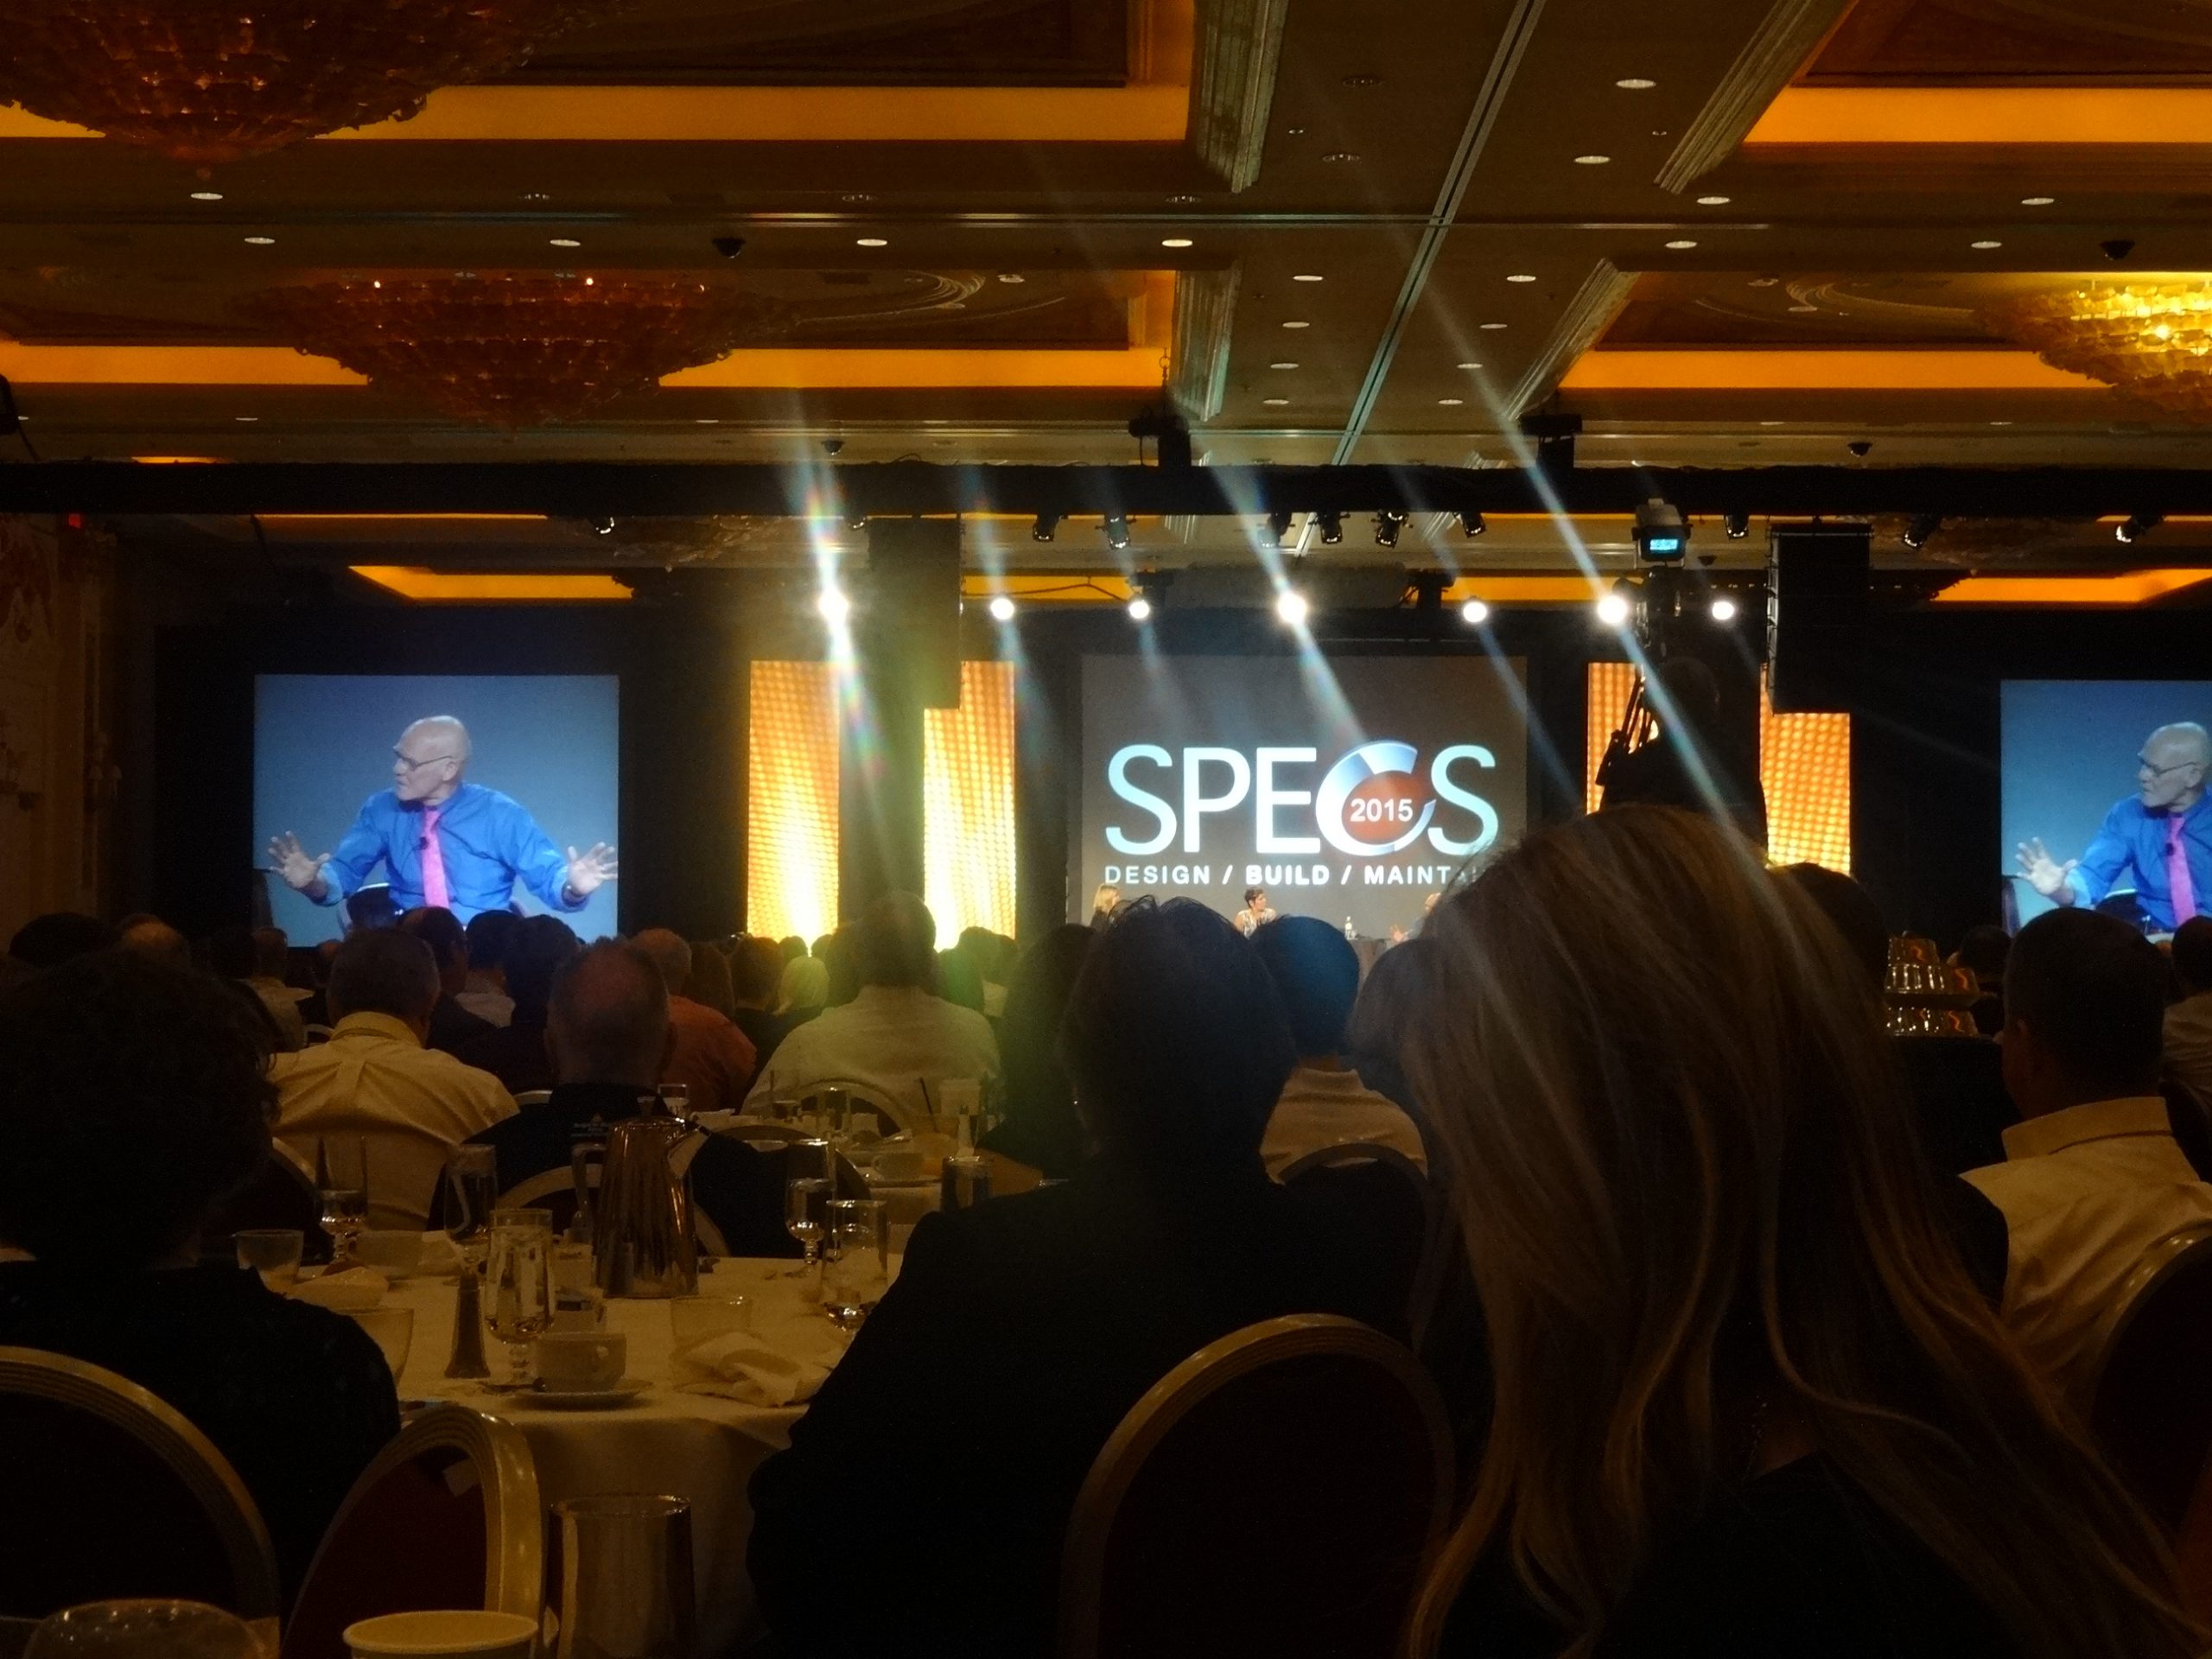 SPECS 2015 - Store Planning, Equipment, Construction and Facilities Services